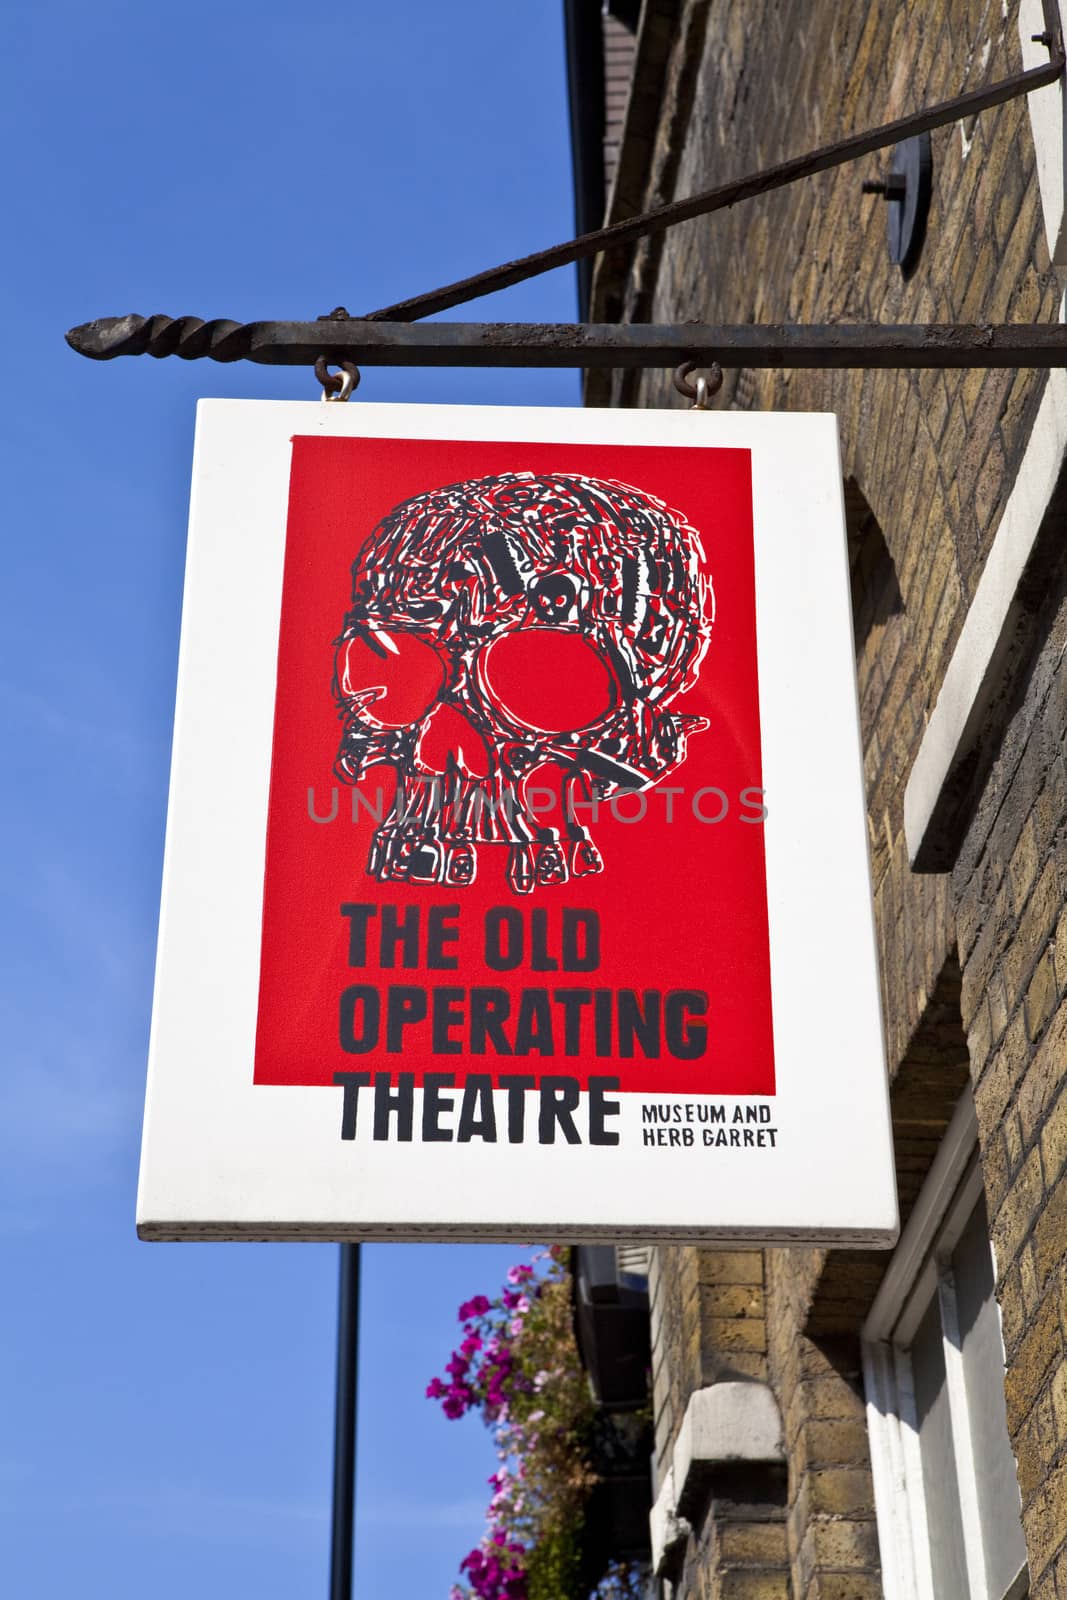 The entrance sign for the Old Operating Theatre and Herb Garret in London.